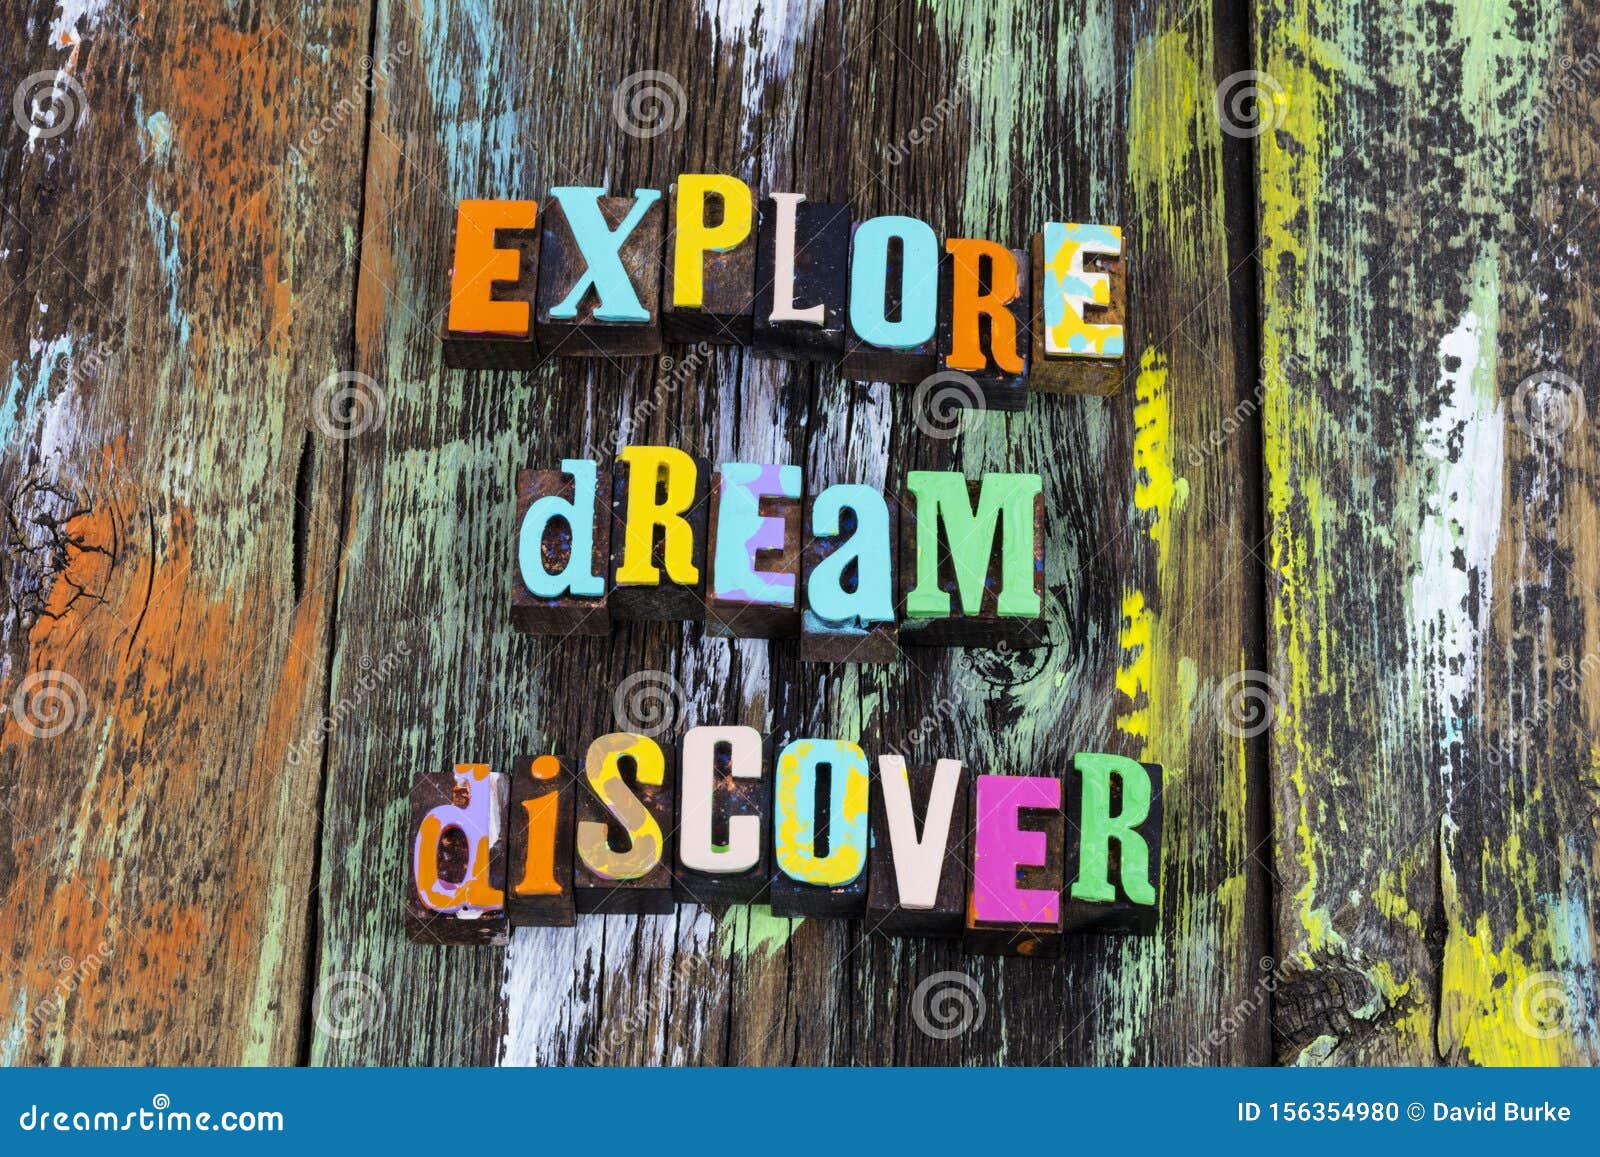 explore dream discover adventure dreaming wander lifestyle discovery